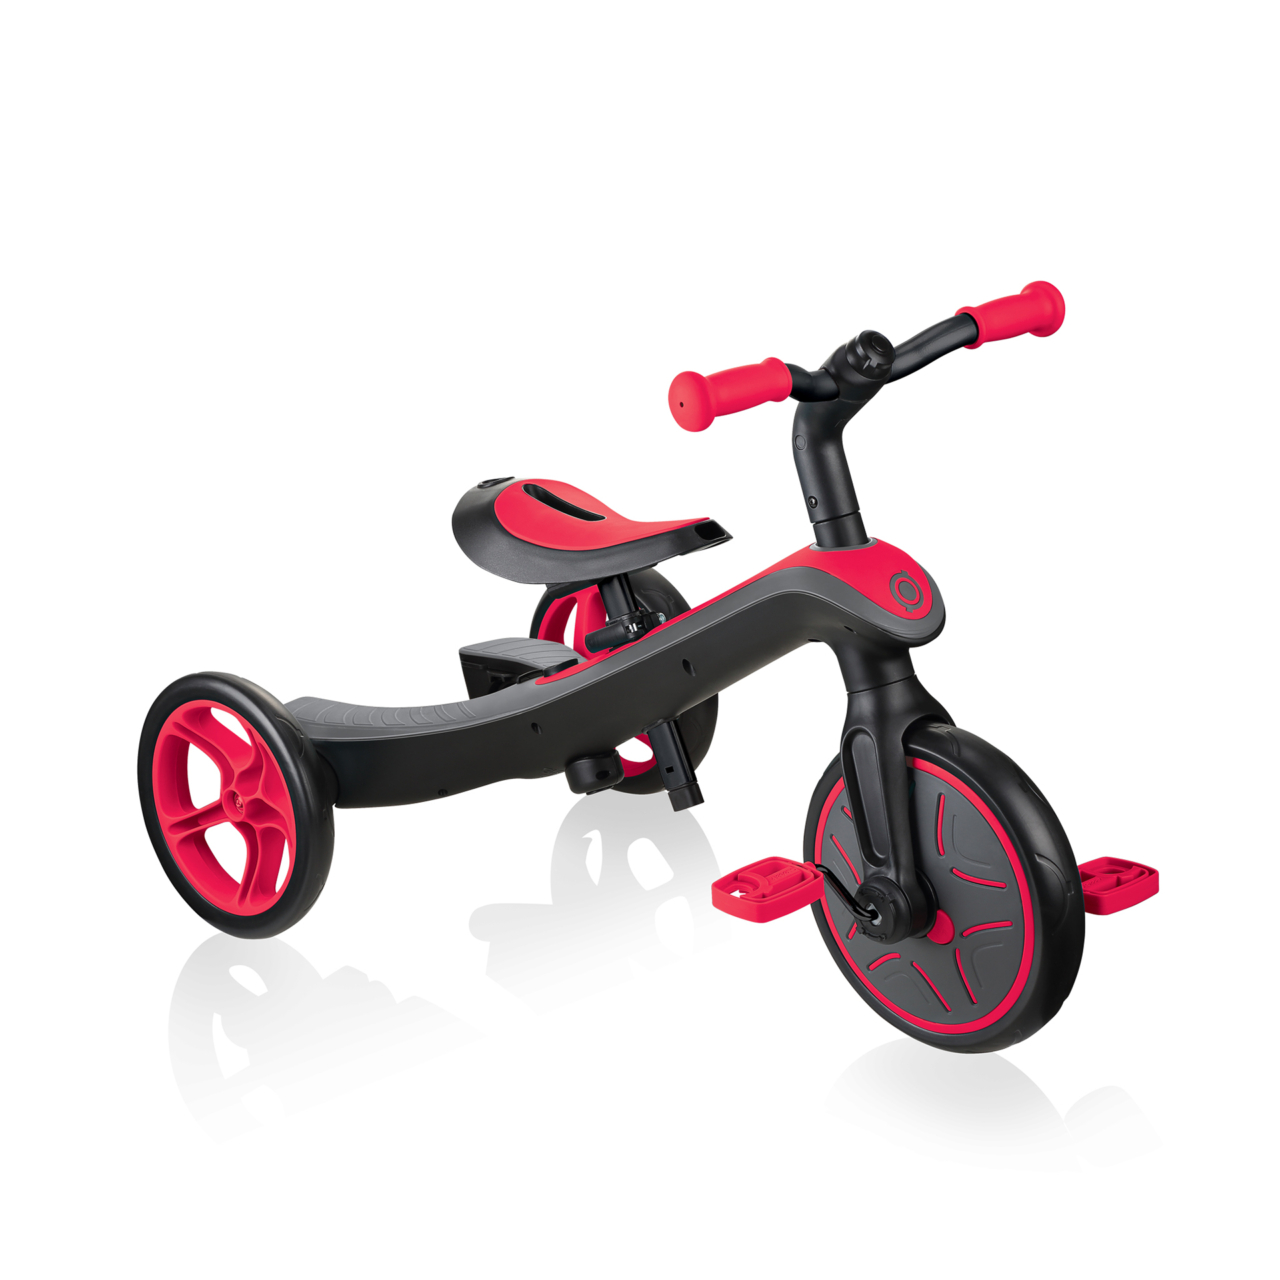 630 102 Trike For 2 Year Olds